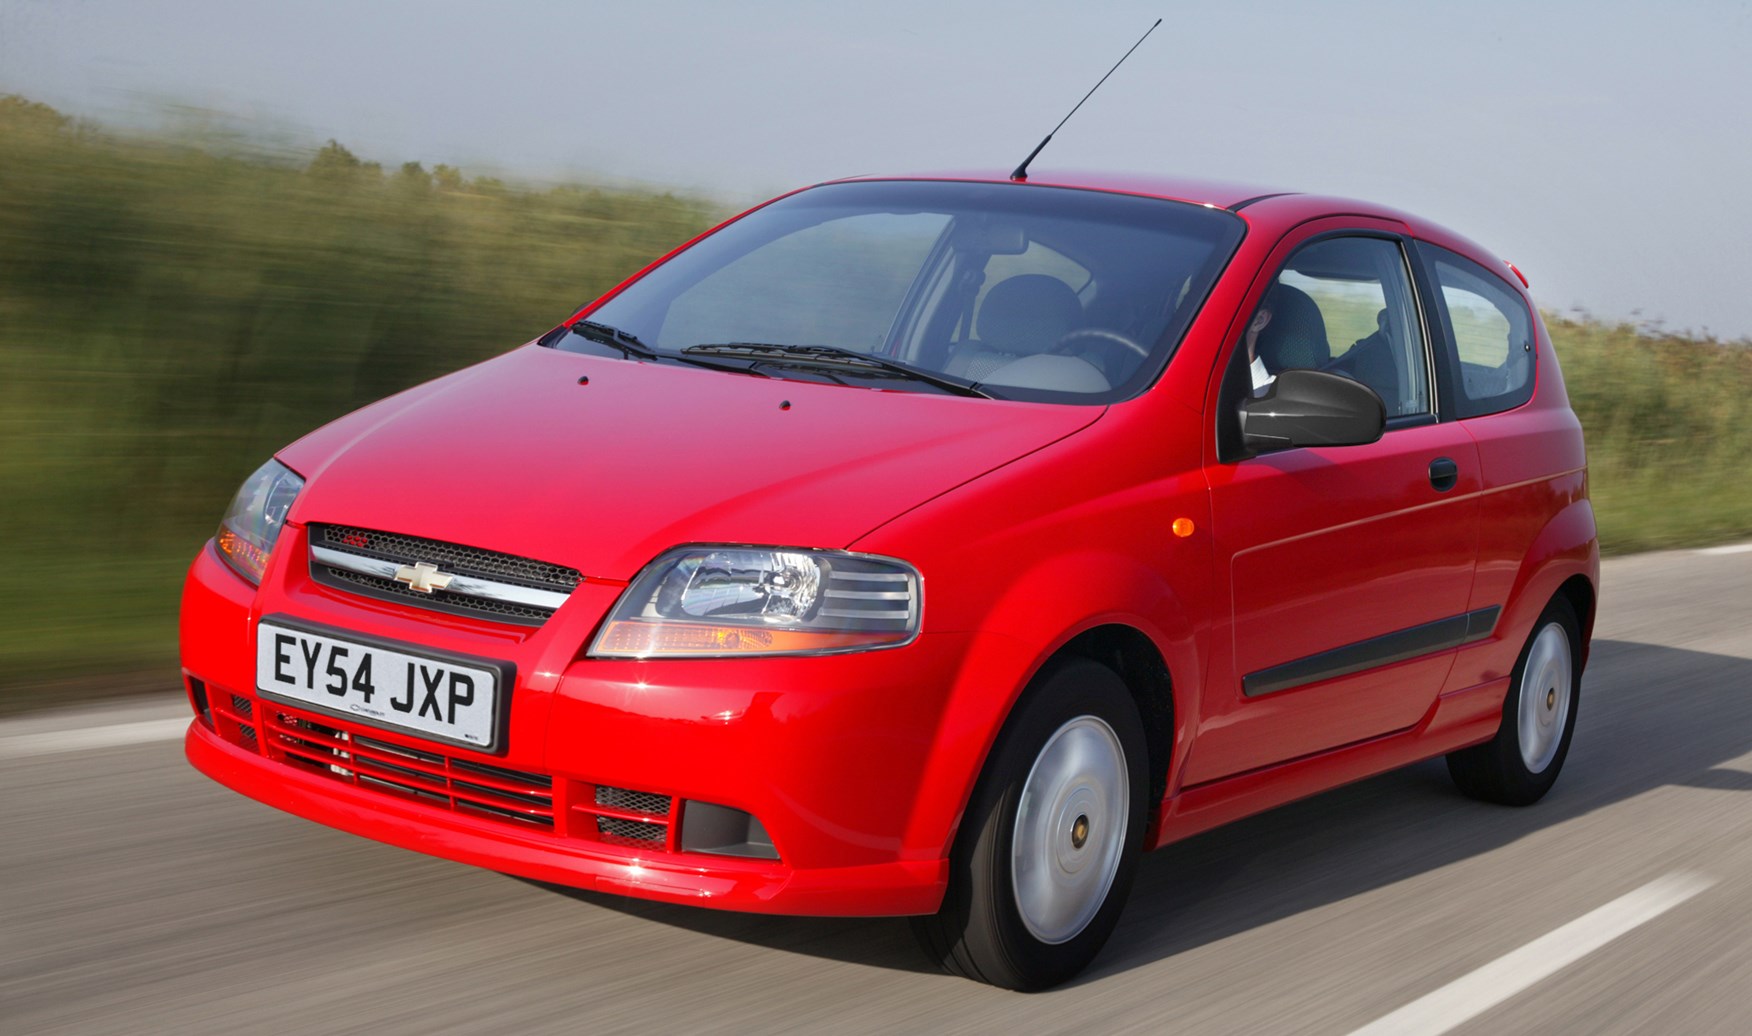 Used Chevrolet Kalos Hatchback (2005 2008) Review Parkers